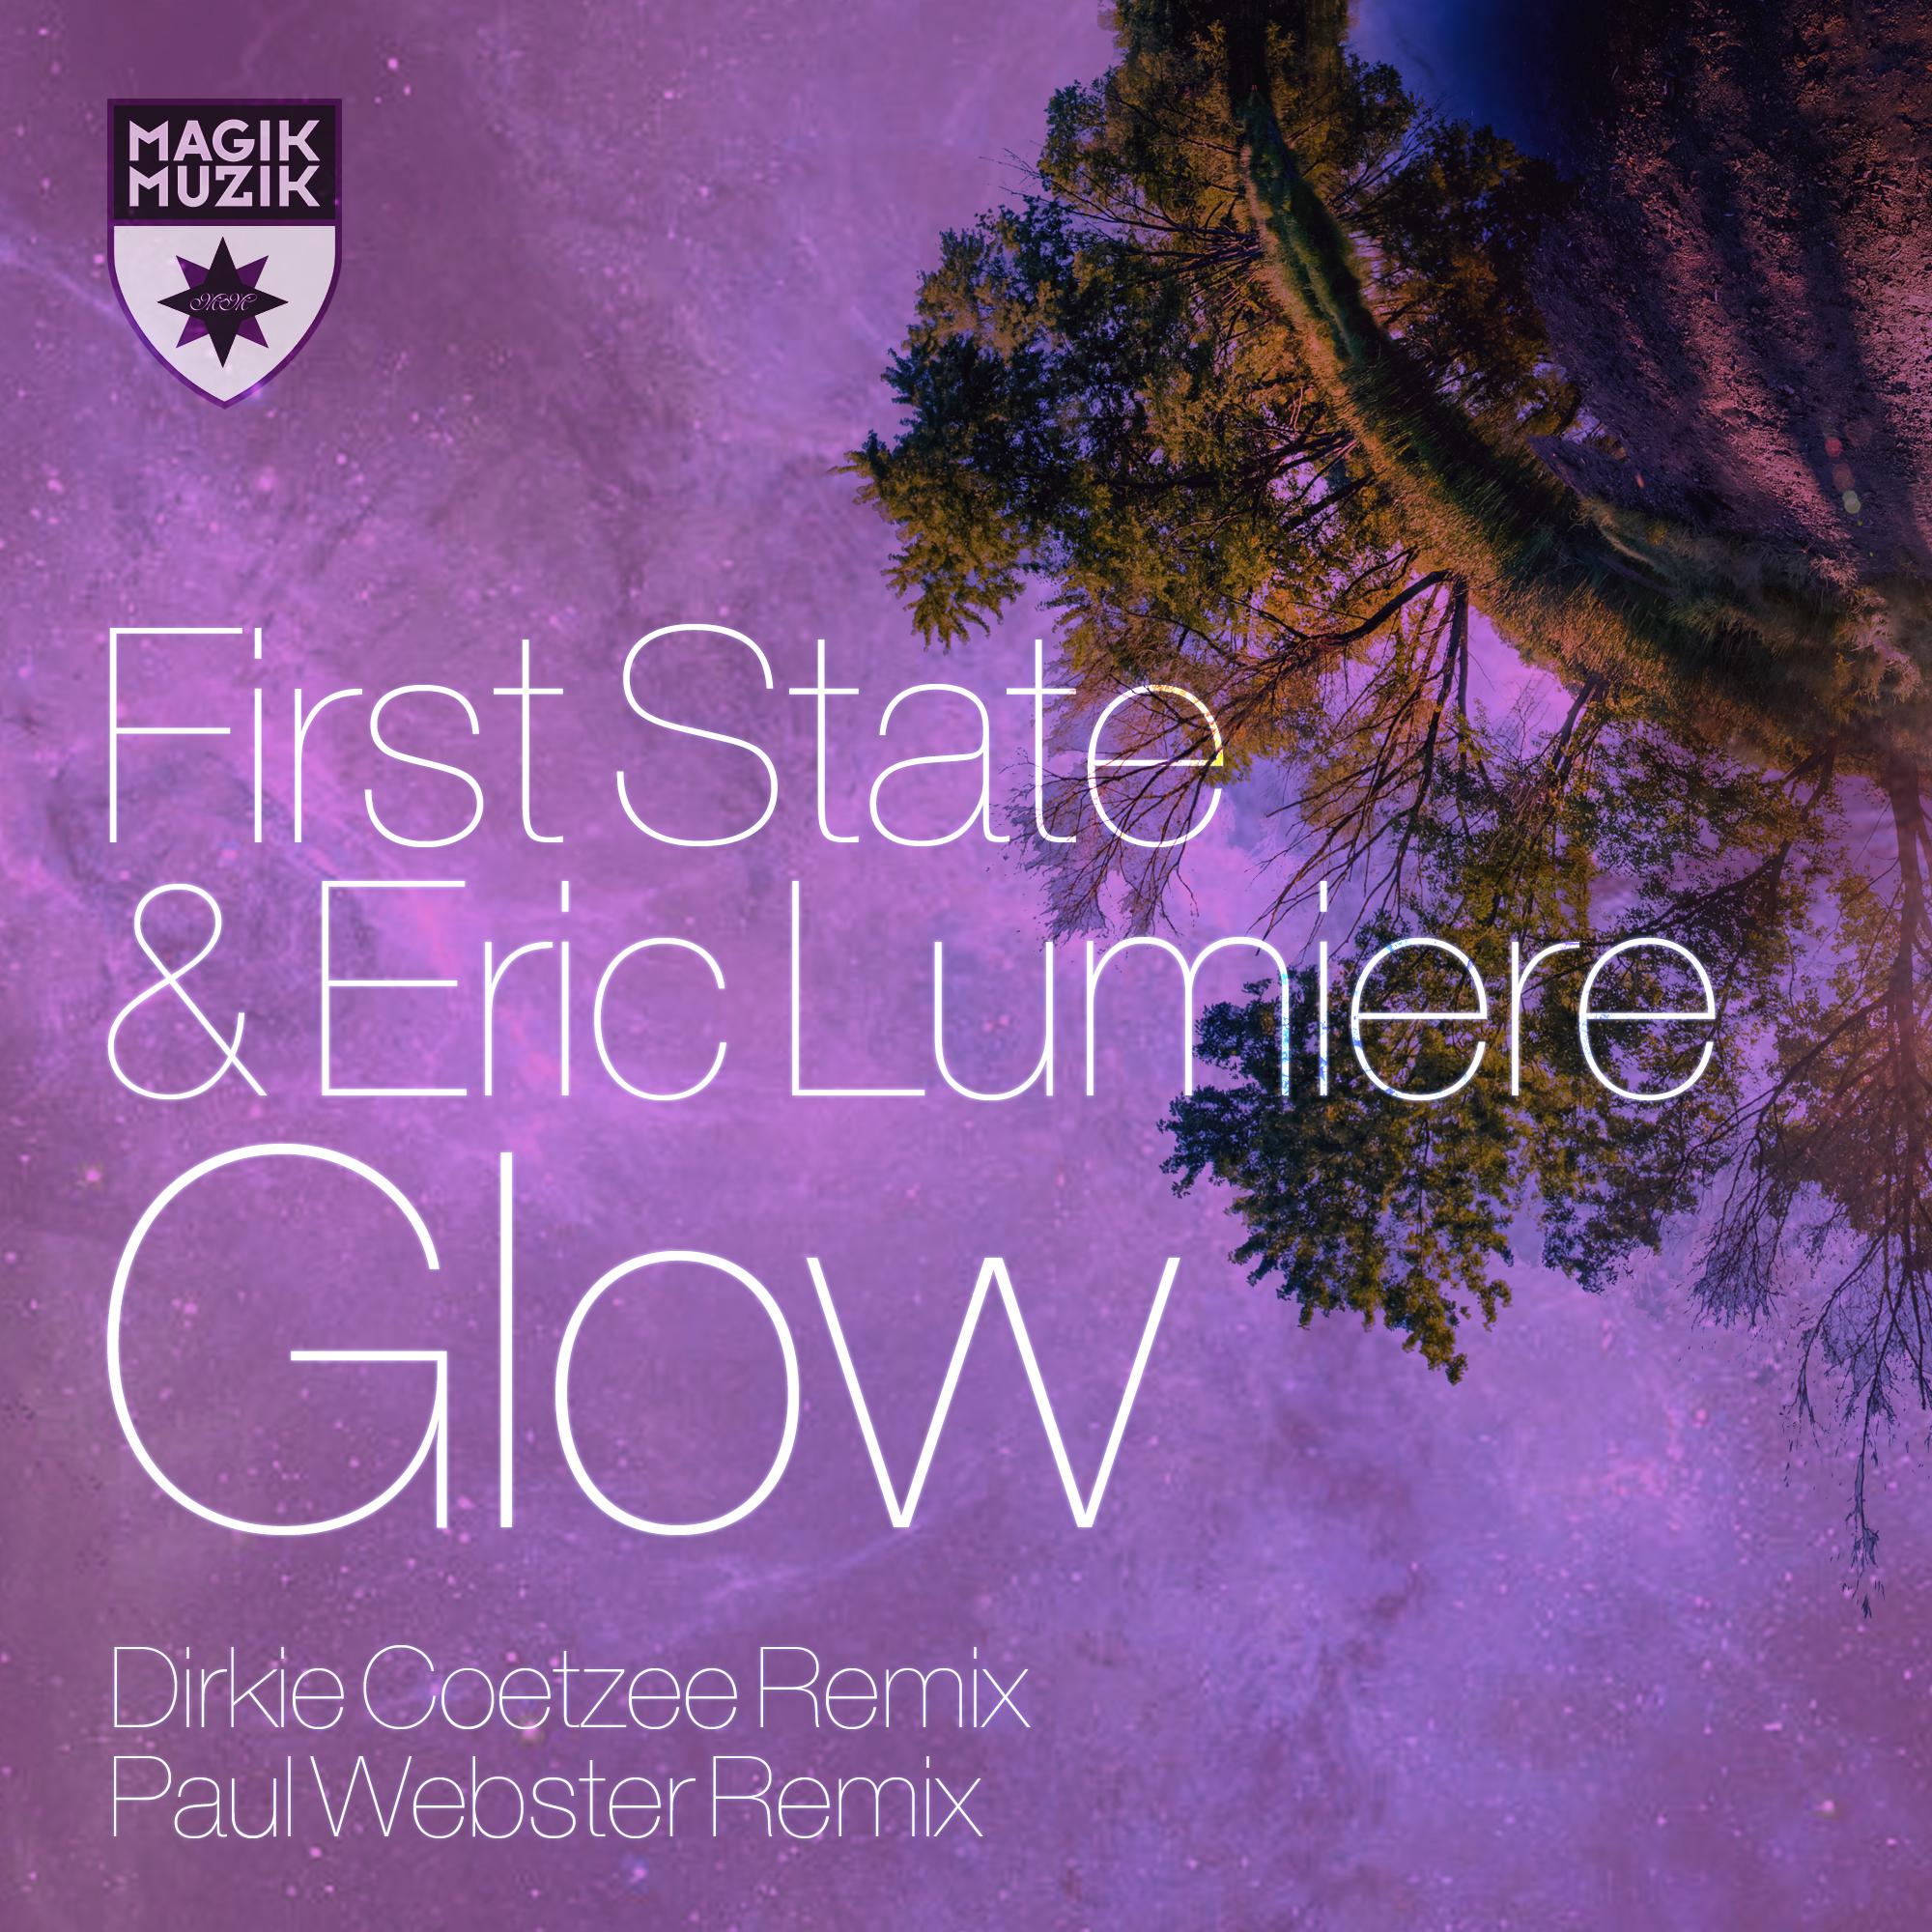 First State - Glow (Paul Webster Remix)